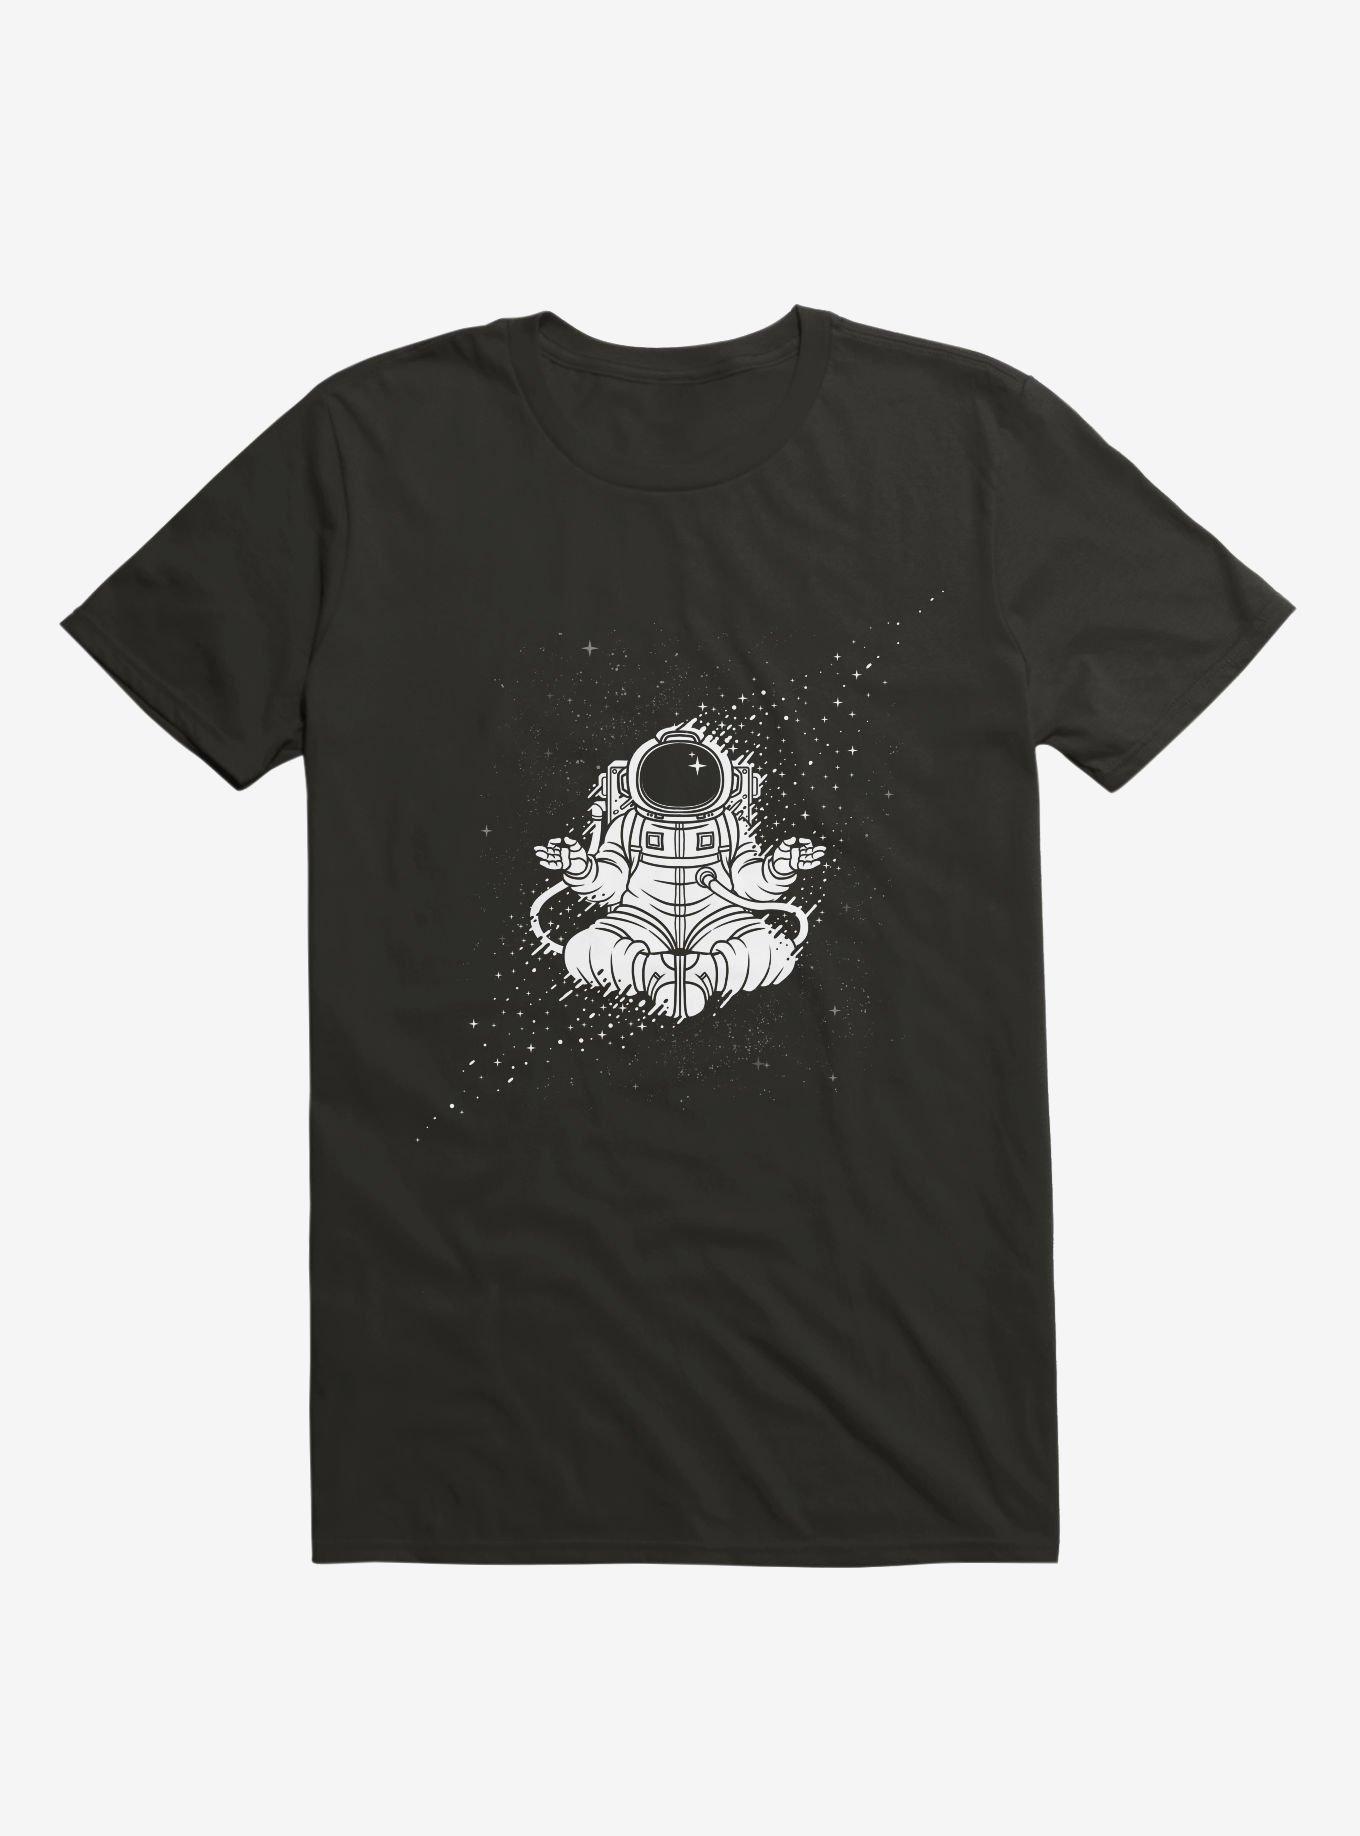 Becoming One With The Universe T-Shirt, BLACK, hi-res